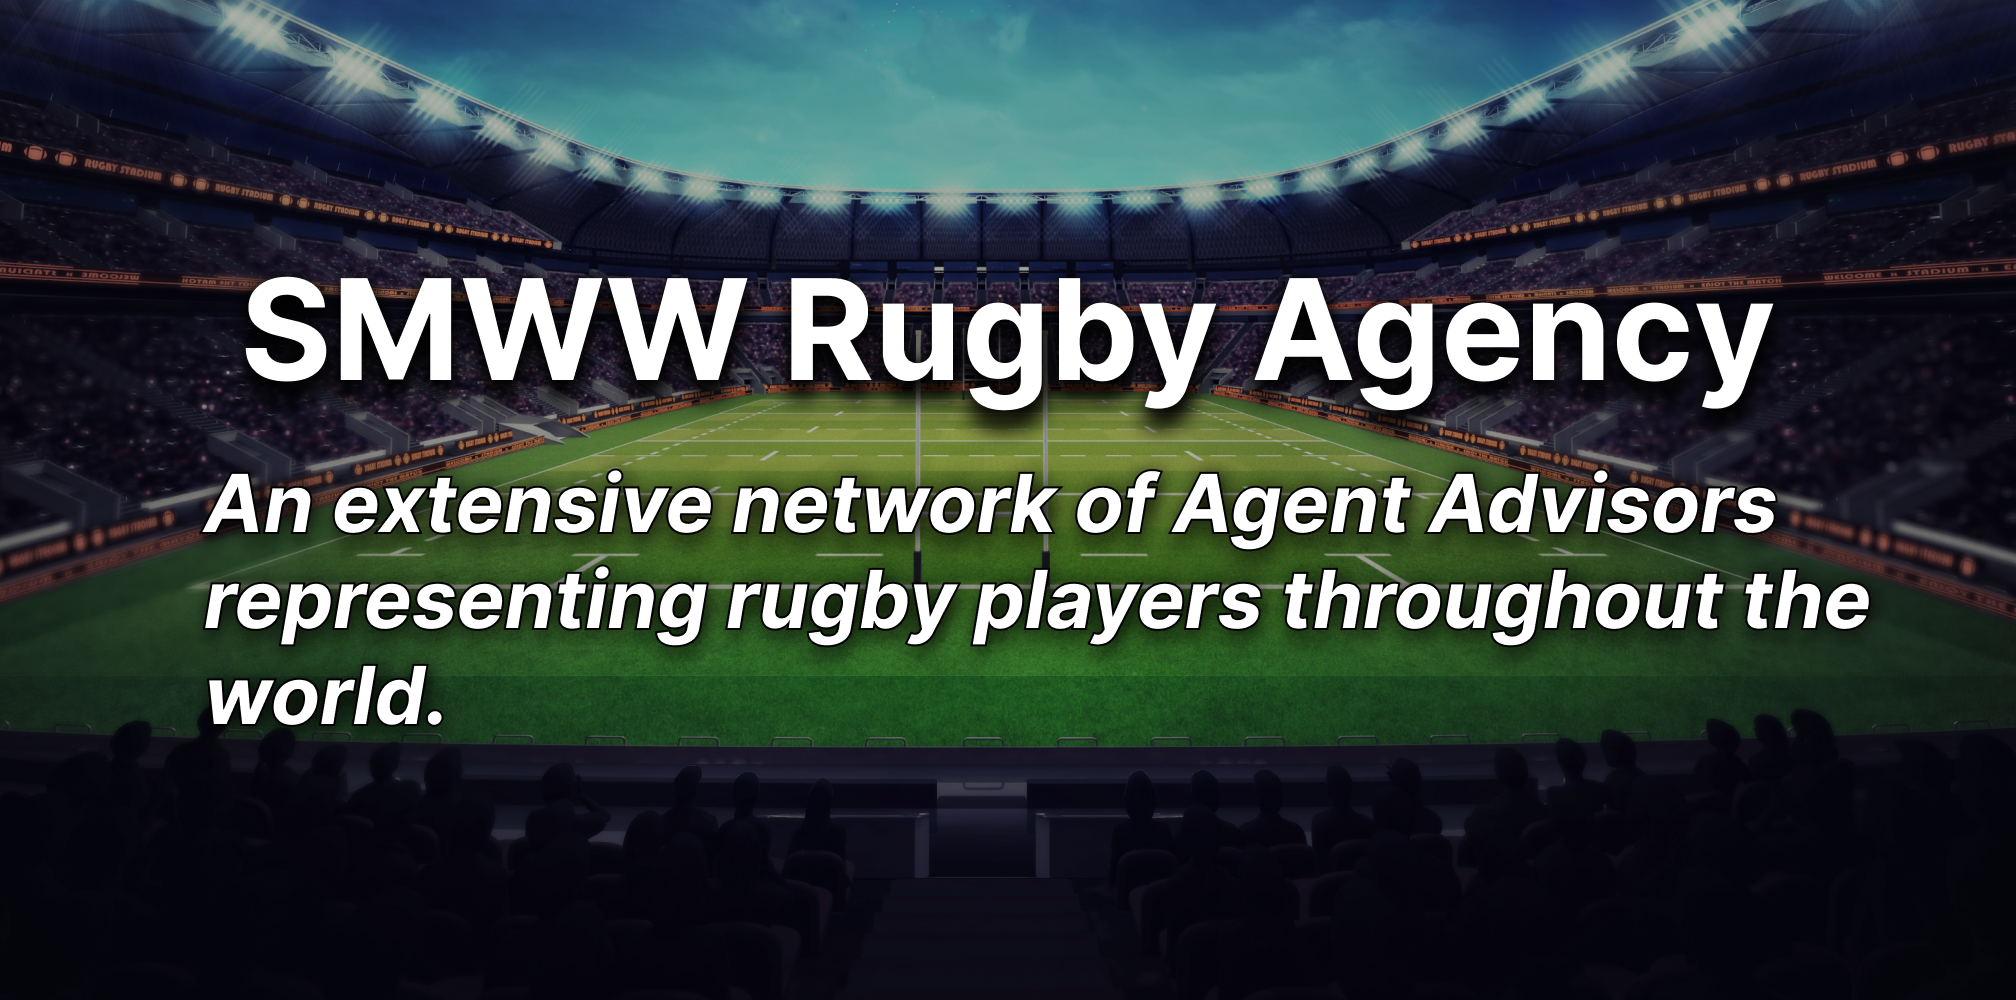 SMWW Rugby Agency